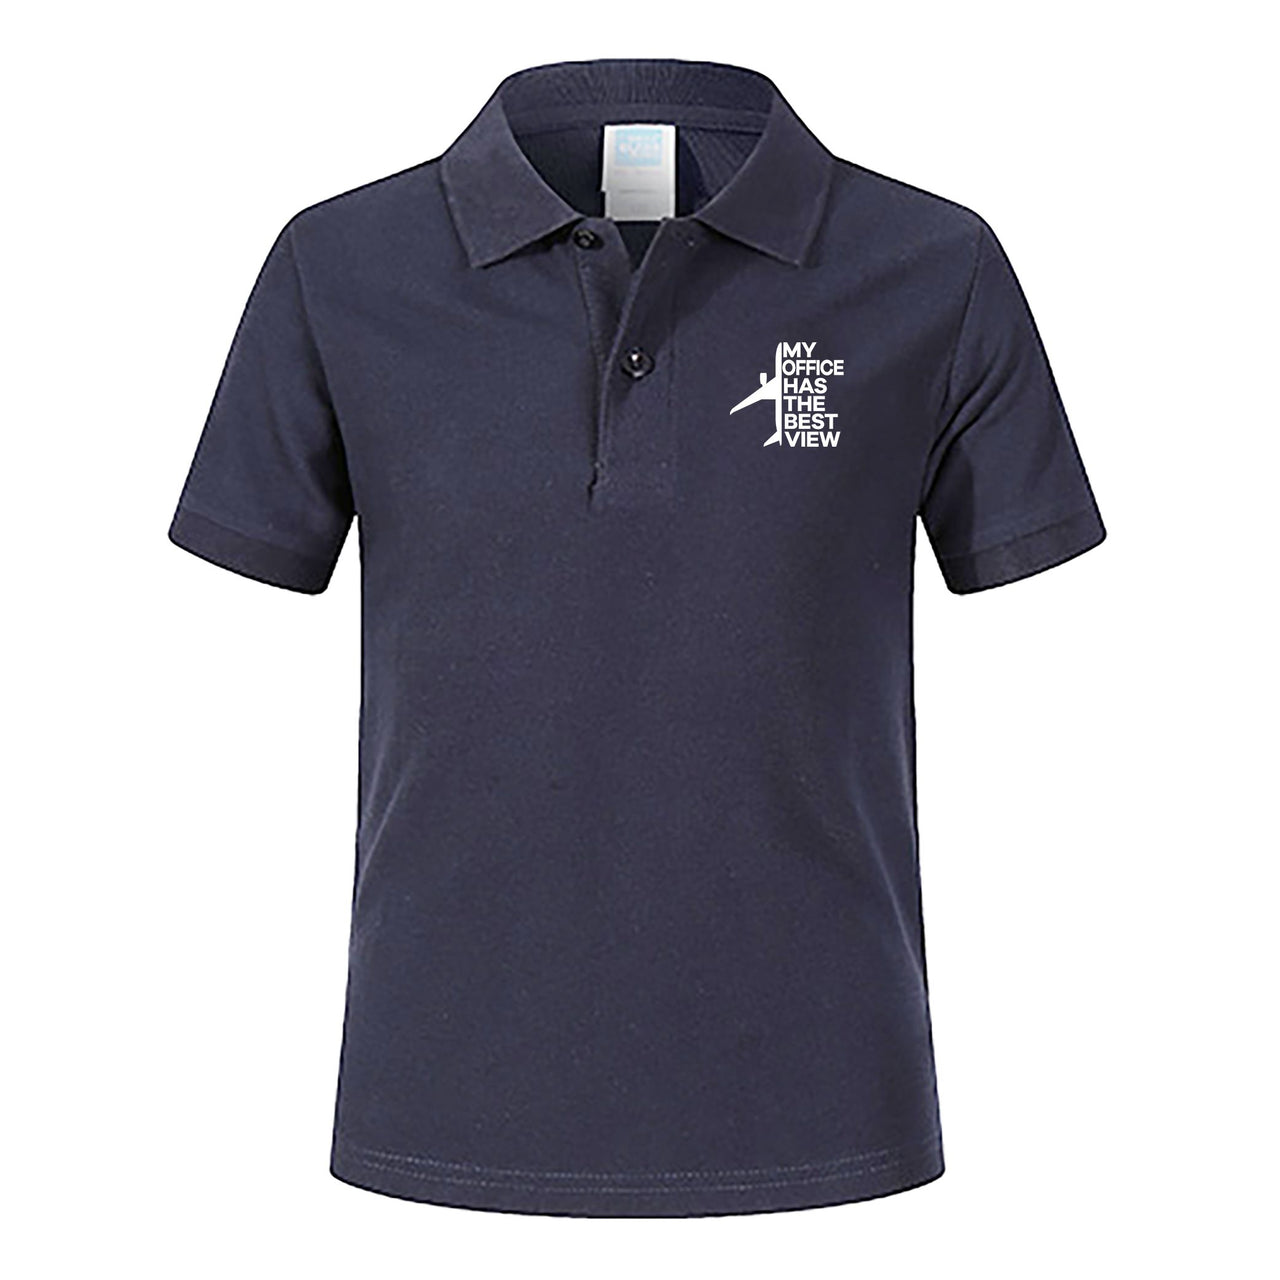 My Office Has The Best View Designed Children Polo T-Shirts